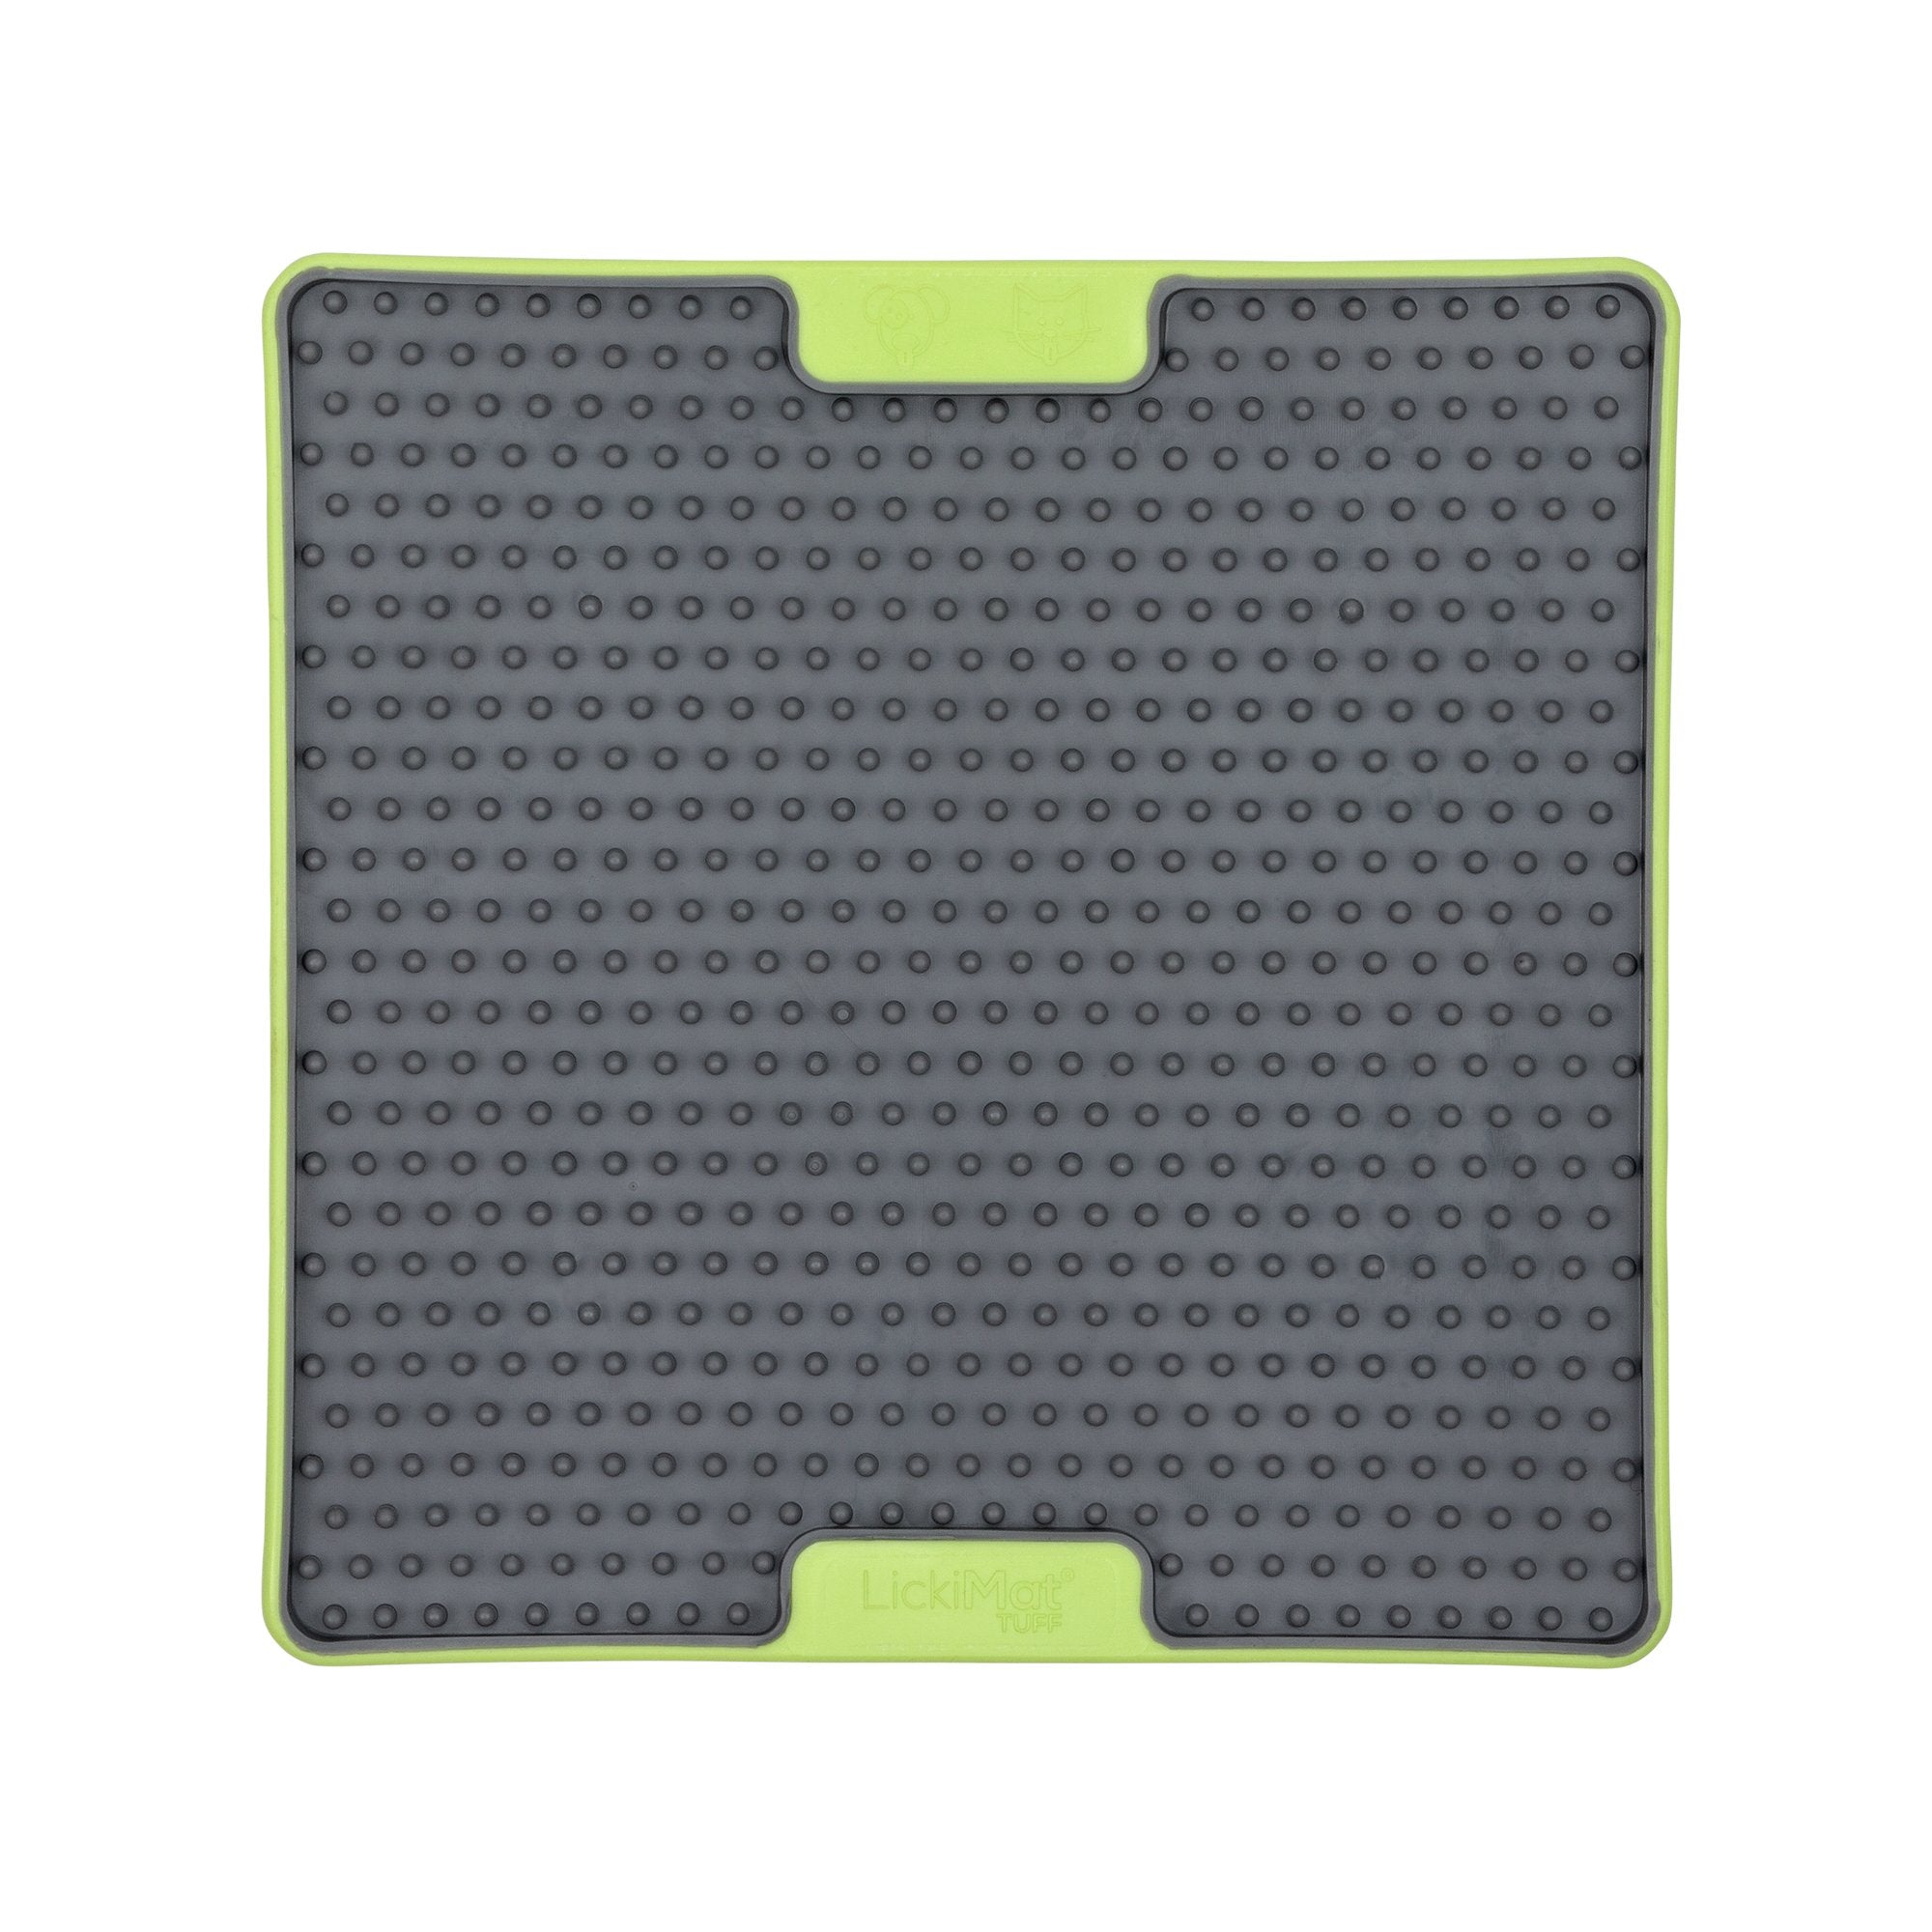 LickiMat Tuff Soother lime green, pet essentials warehouse, pet city